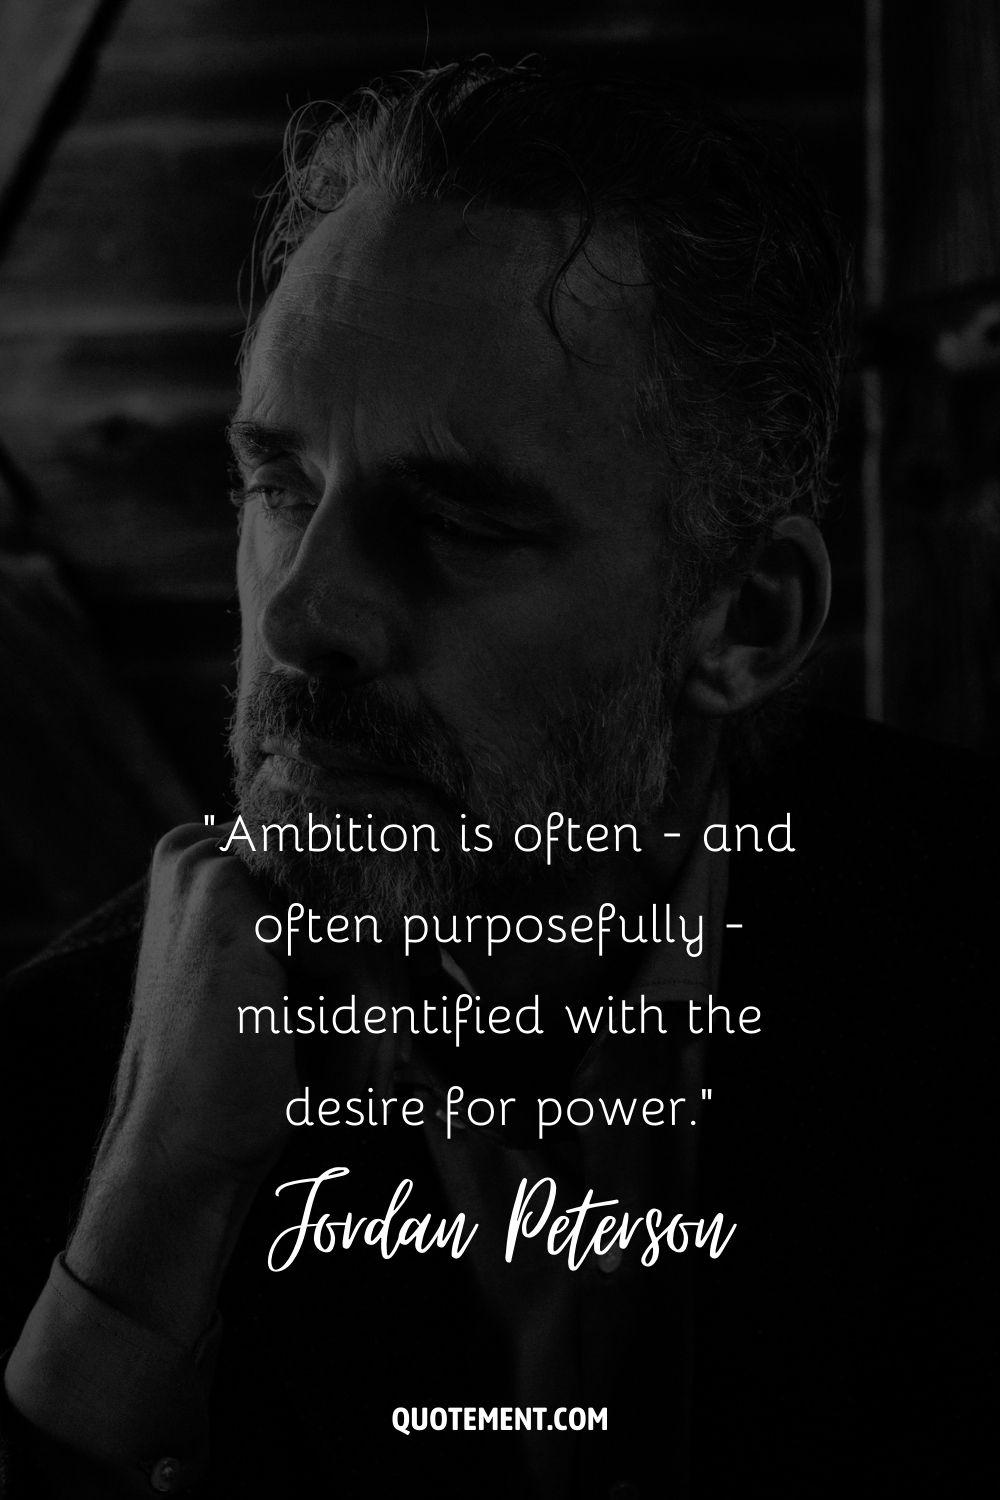 Ambition is often - and often purposefully - misidentified with the desire for power